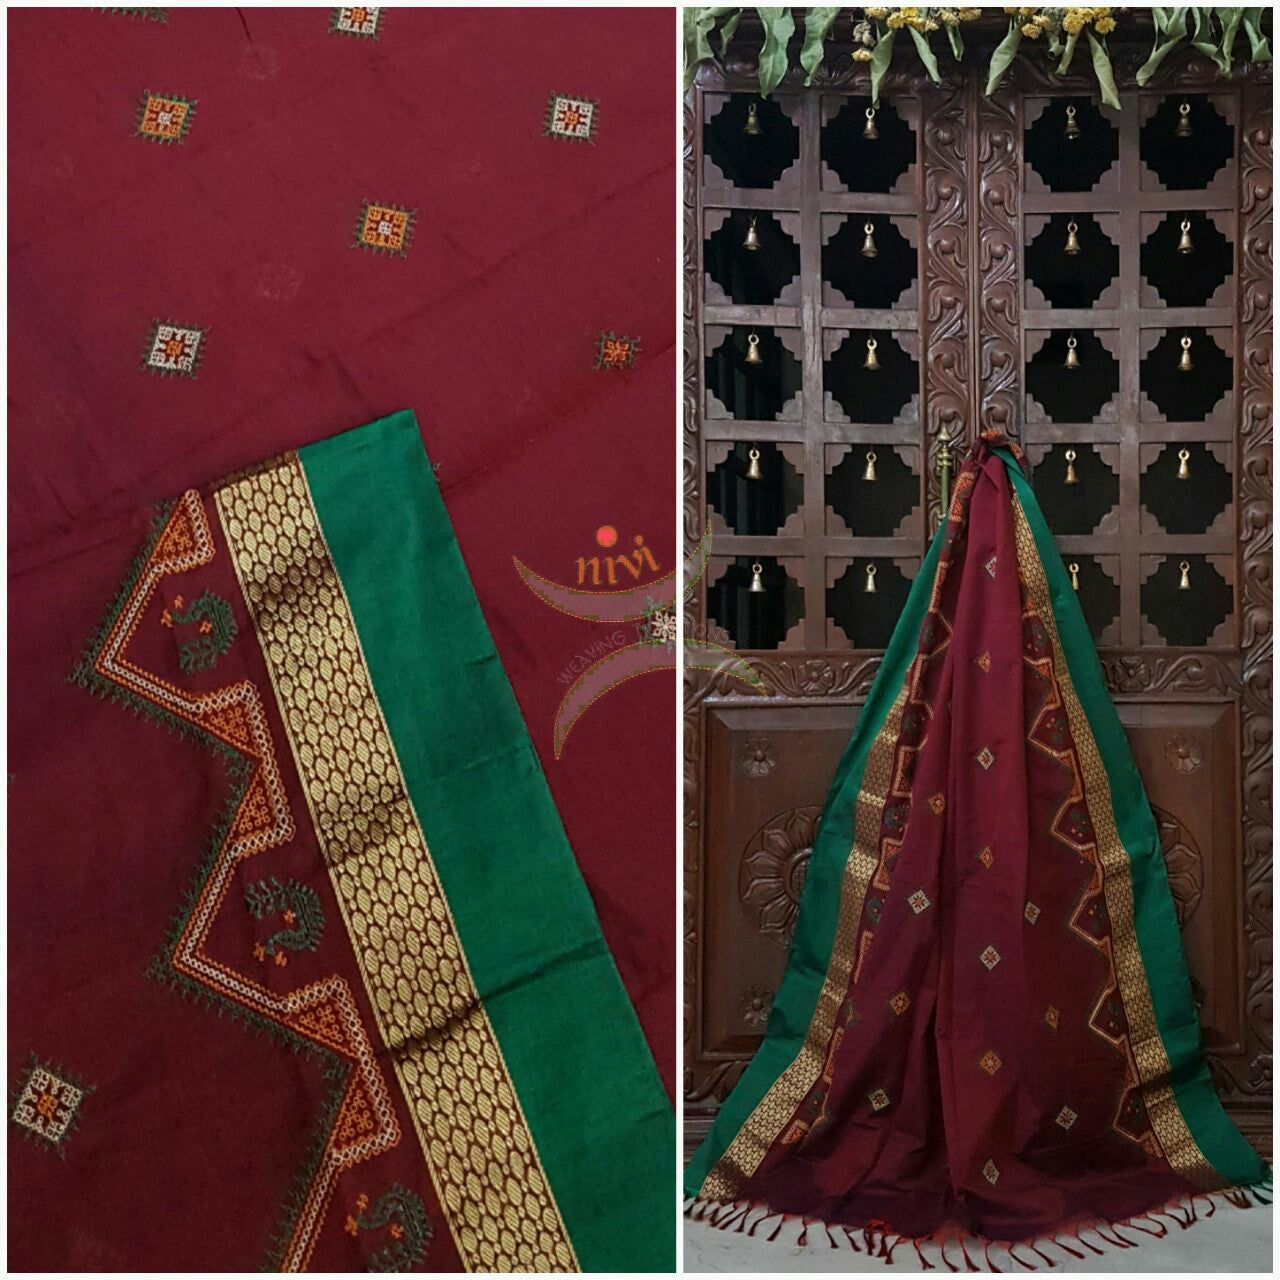 Maroon with green kota cotton kasuti embroidered dupatta with traditional peacock motif